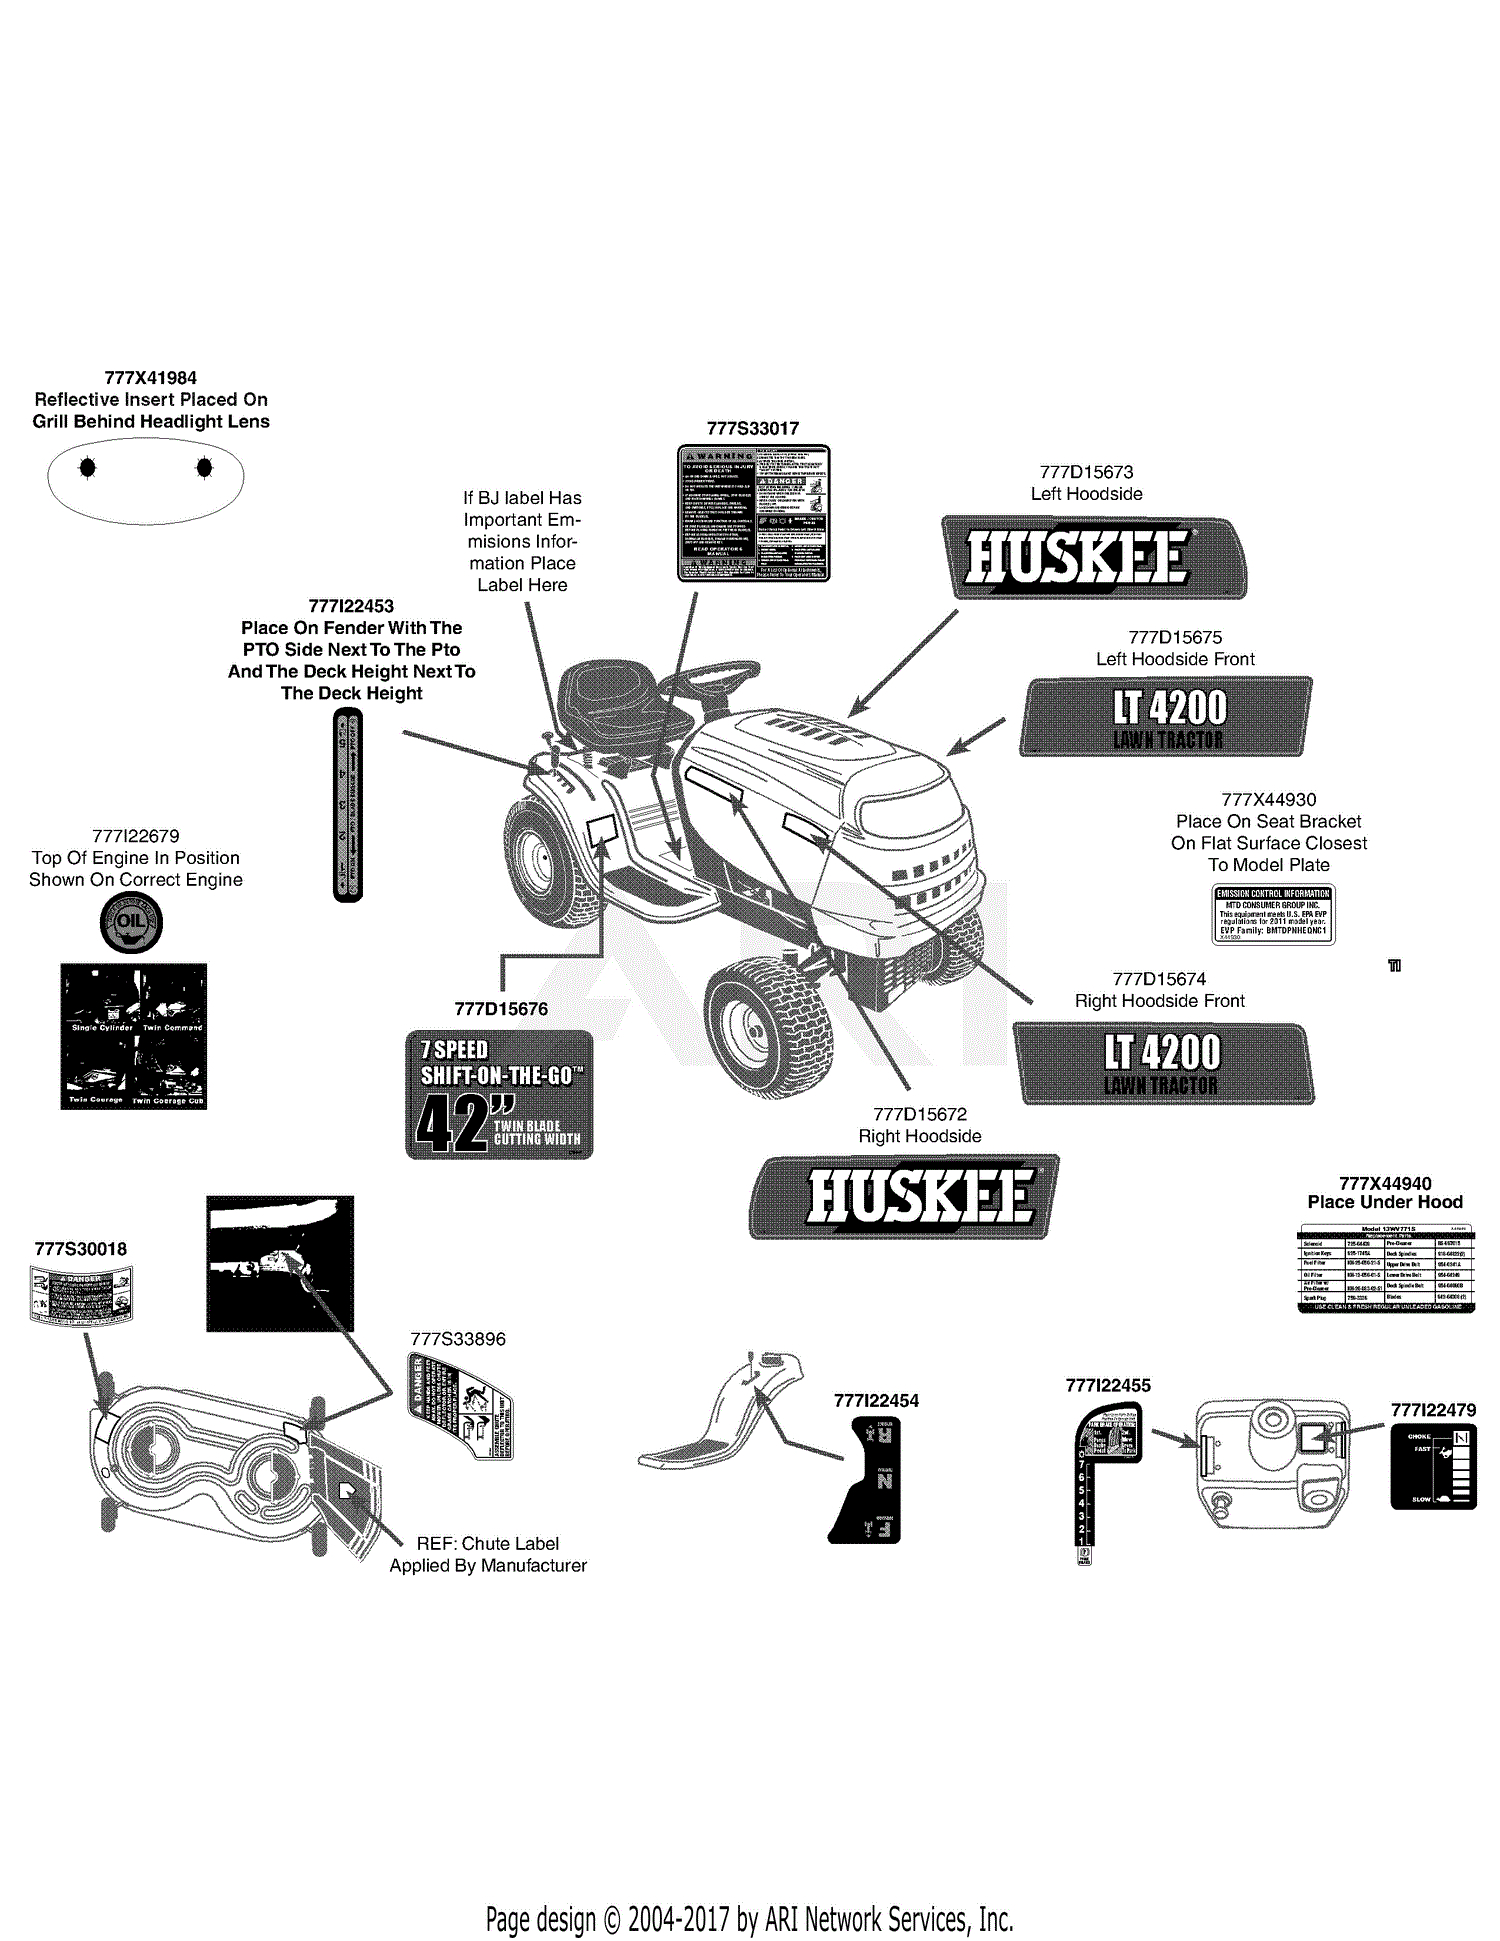 Huskee Lawn Mower Parts Diagram Mtd 13wv771s031 Huskee Lawn Tractor 2011 Tractor Supply Wiring